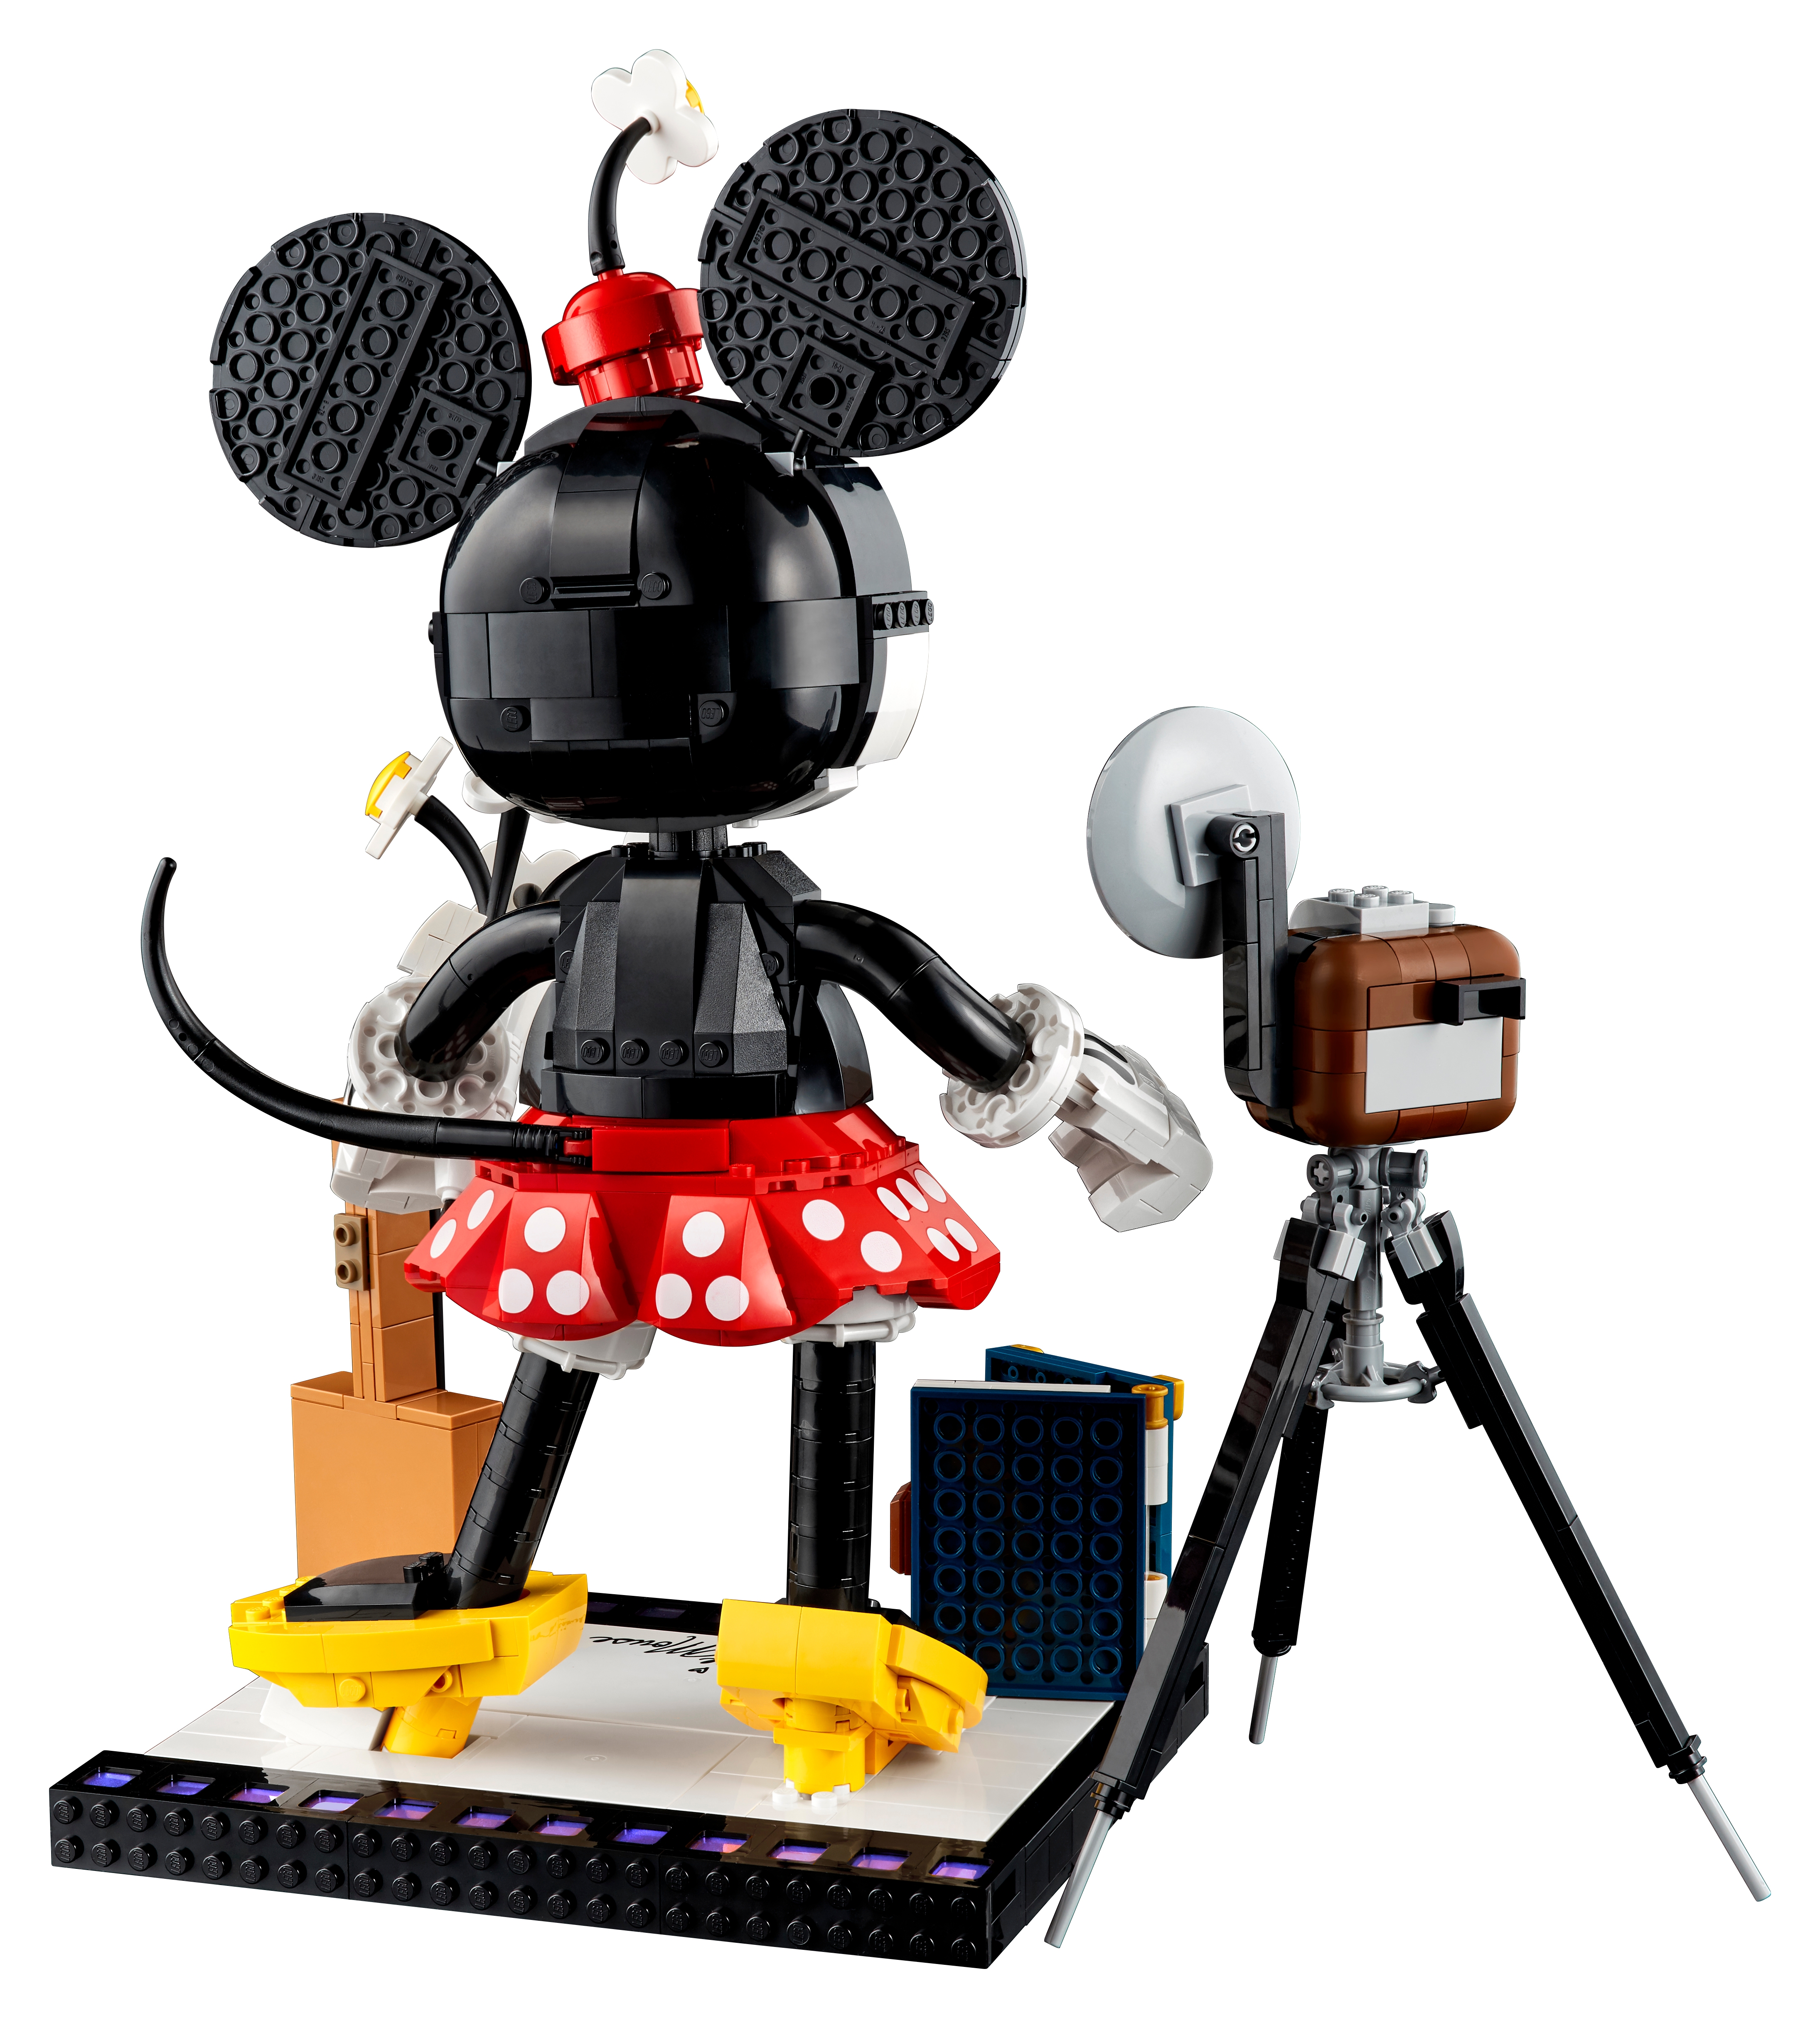 1,739 Pieces Building Kit LEGO ǀ Disney Mickey Mouse & Minnie Mouse Buildable Characters for sale online 43179 